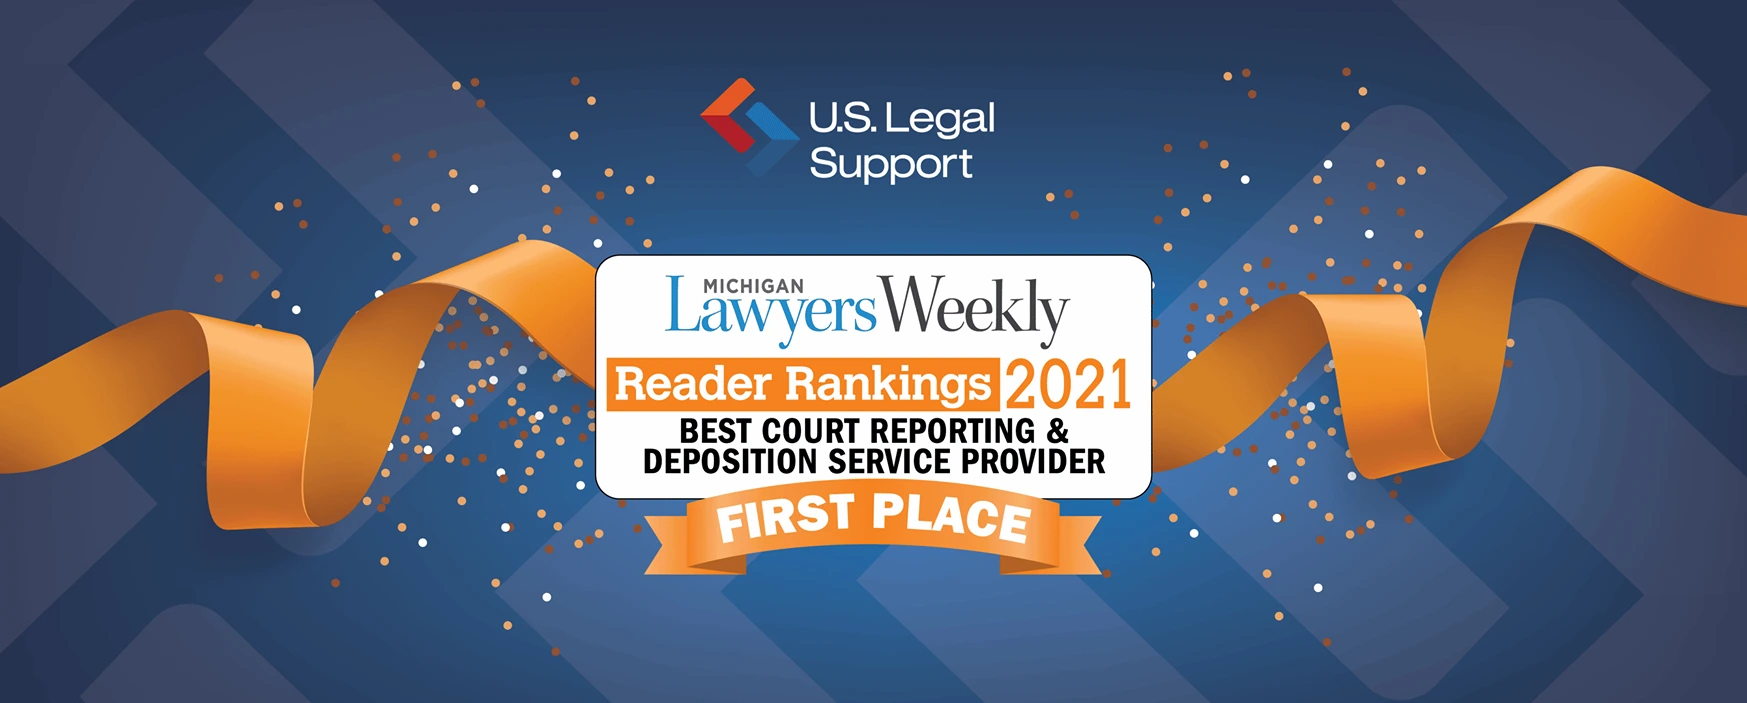 U.S. Legal Court Reporting & Deposition Award